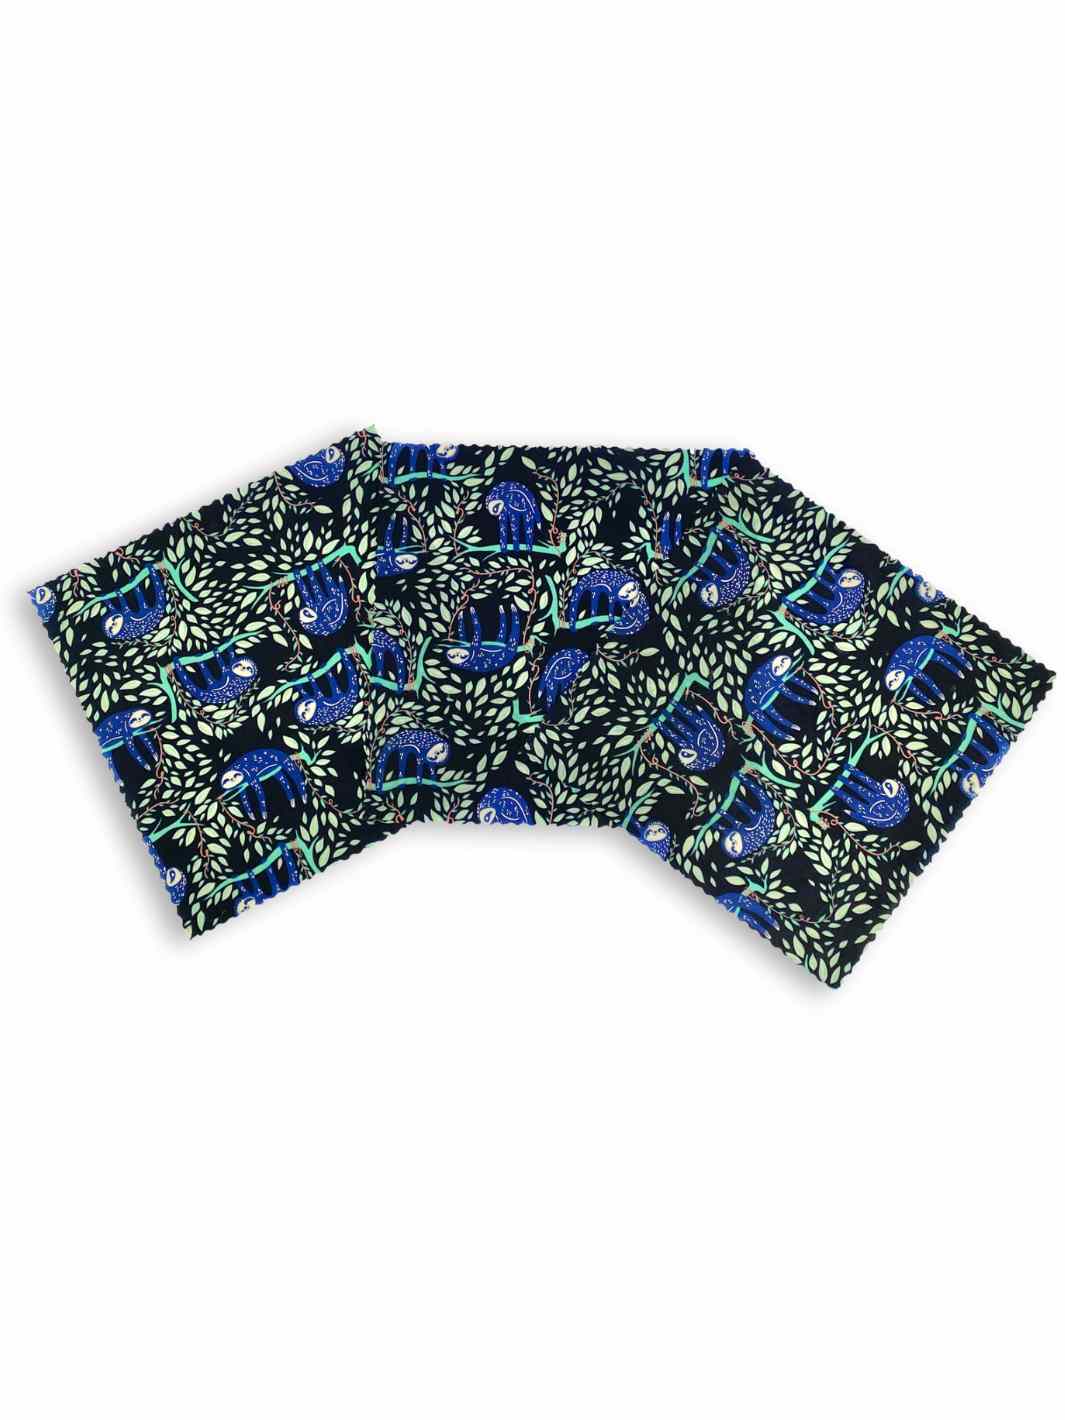 Good Soul Shop Set of three 8-inch beeswax food wraps fanned out in a purple black sloth pattern